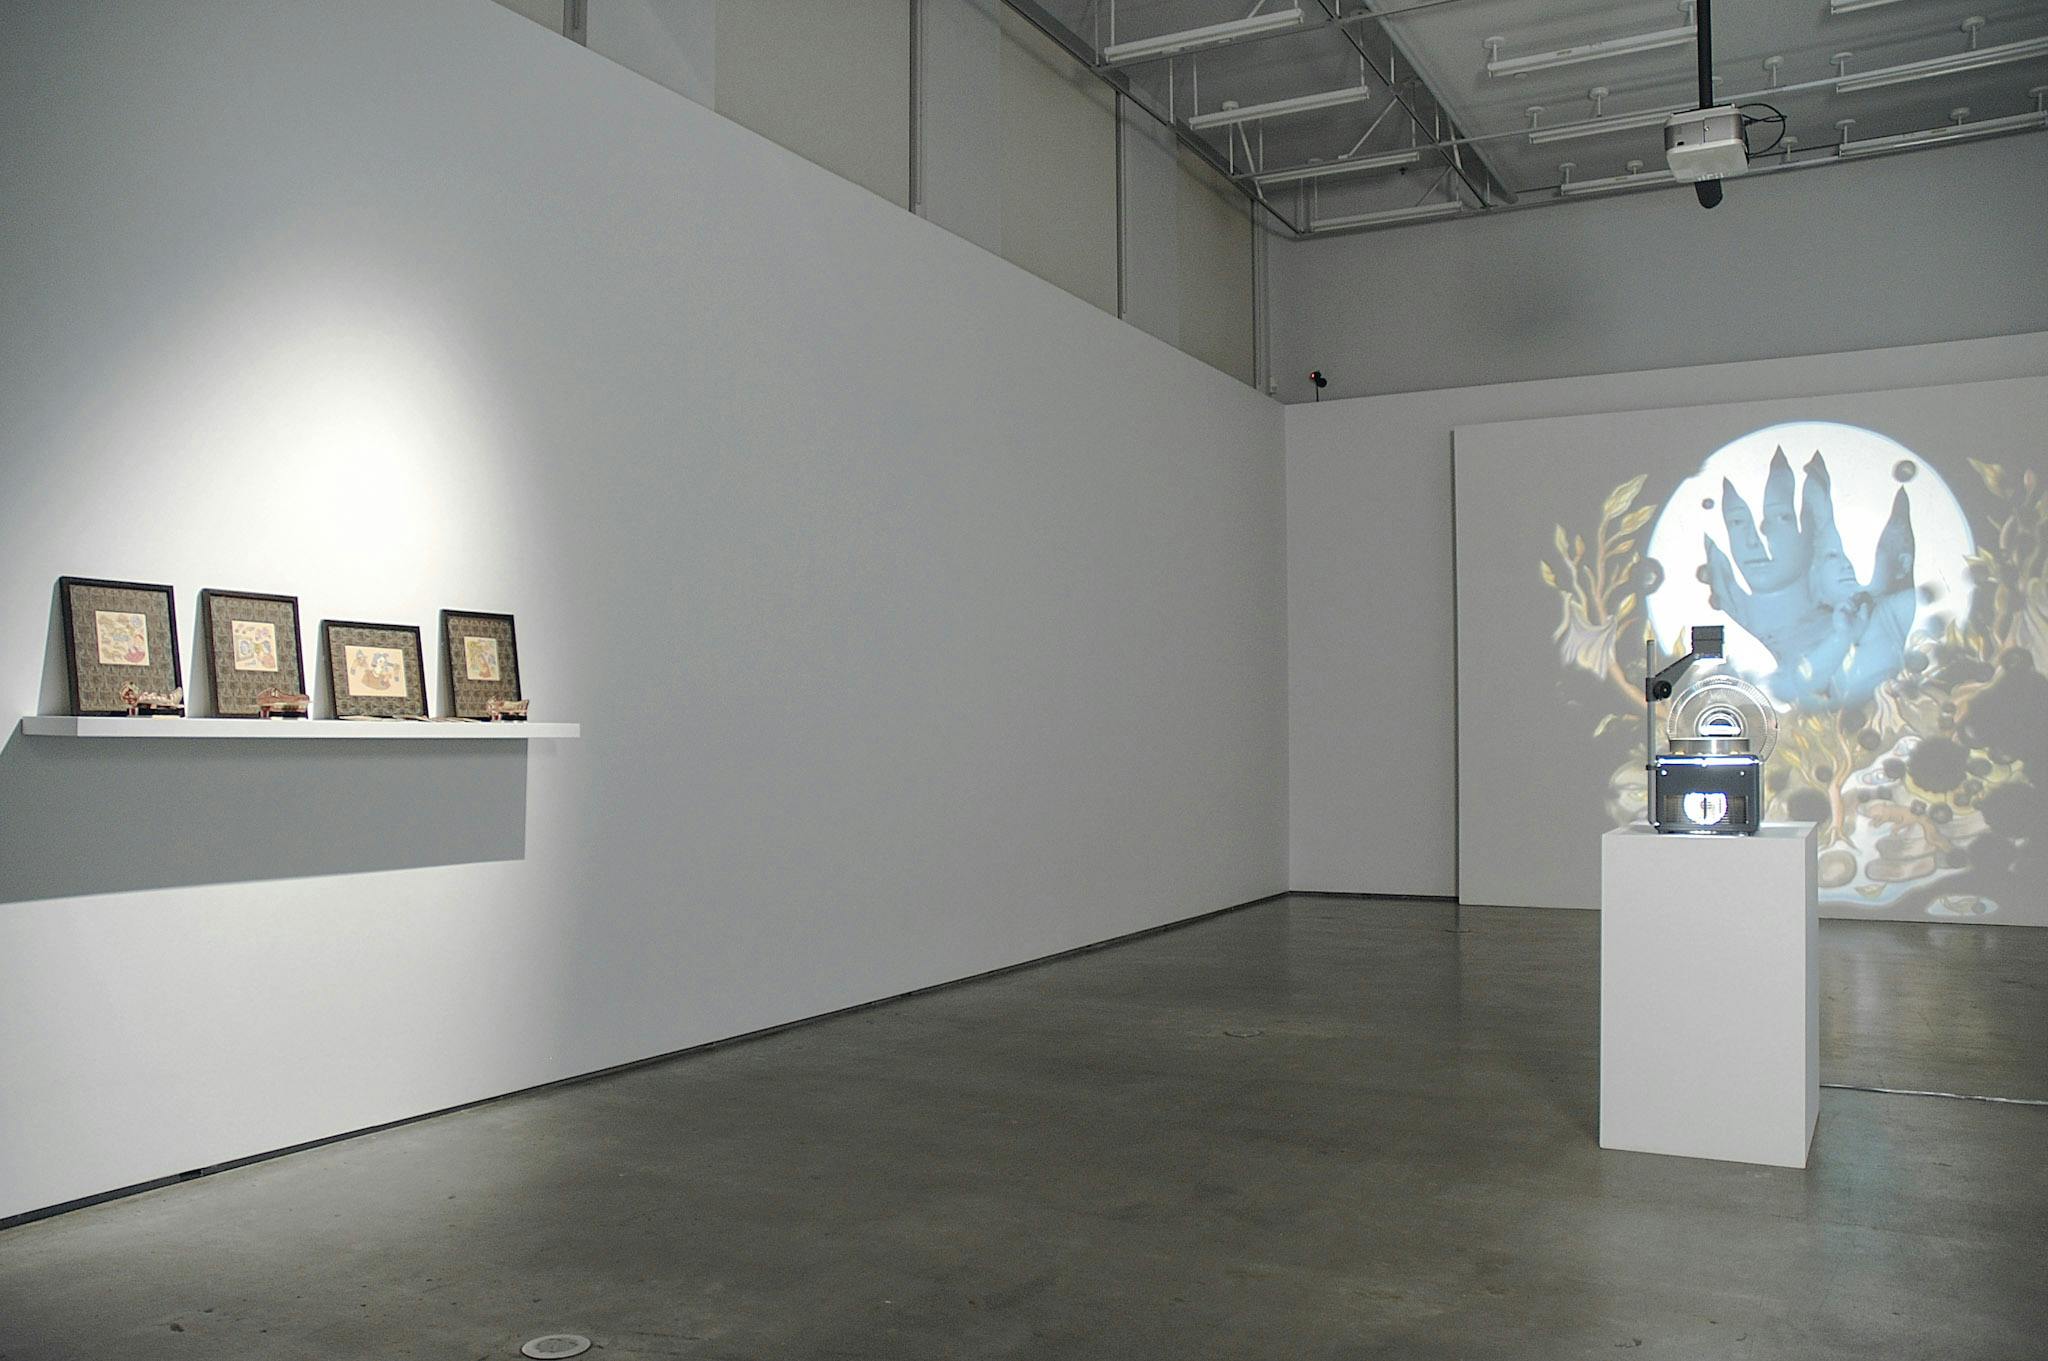 An installation image of artworks in a gallery. Four framed illustrations are placed on a small shelf attached to a wall on the left side. A projector placed in the middle of the room project an illustration of a blue hand on a far wall.